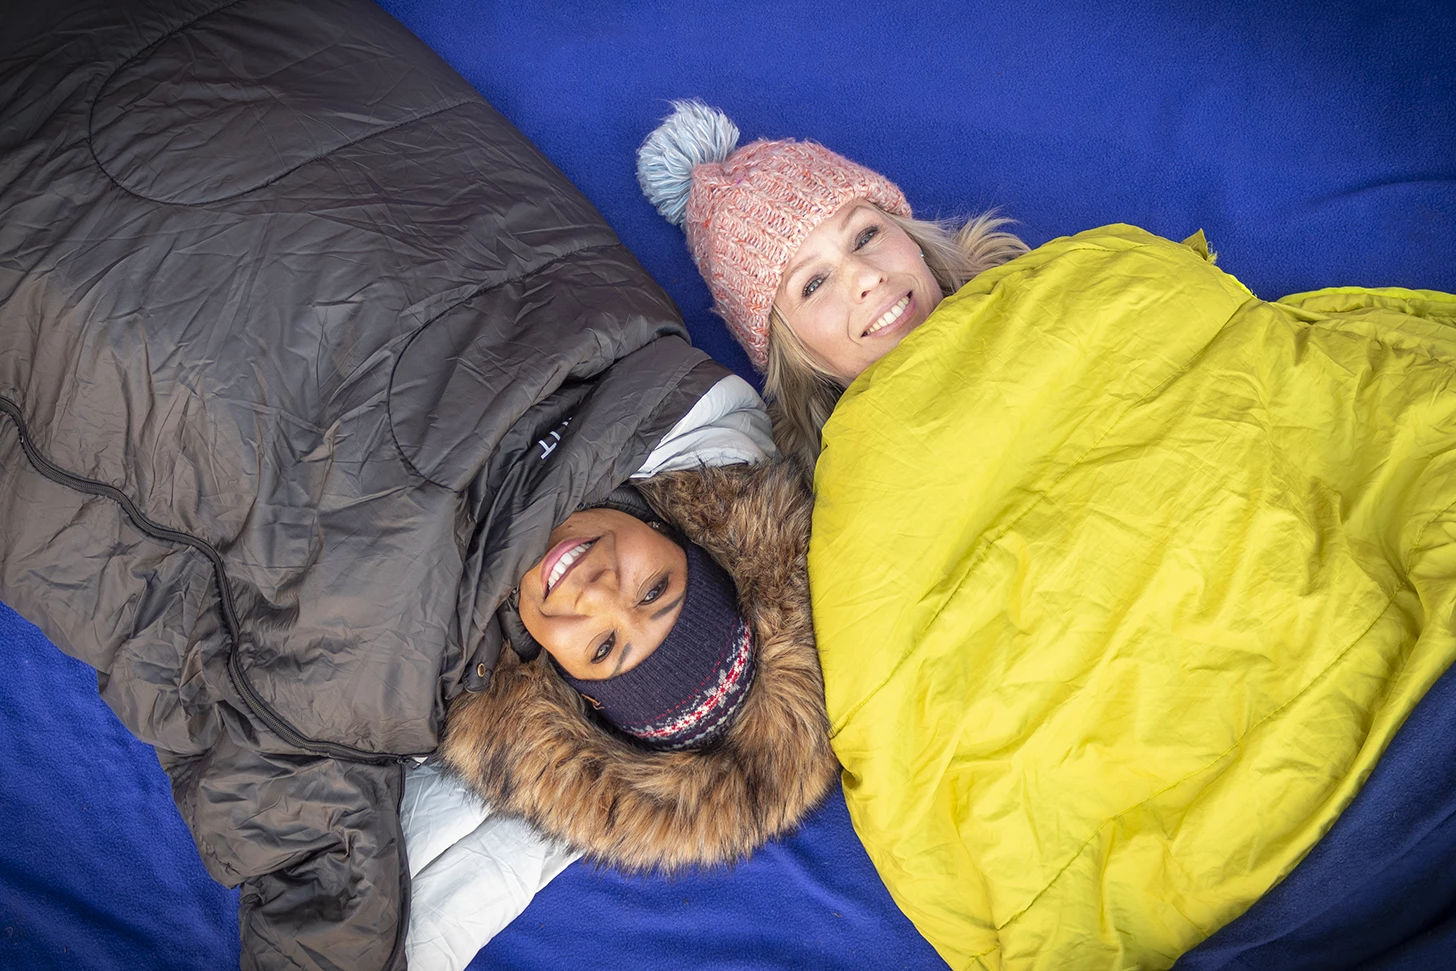 Bianca Robinson, CEO at CEO Sleepout, and previous participant Melissa Coutts, head of operations at Recruitrite.